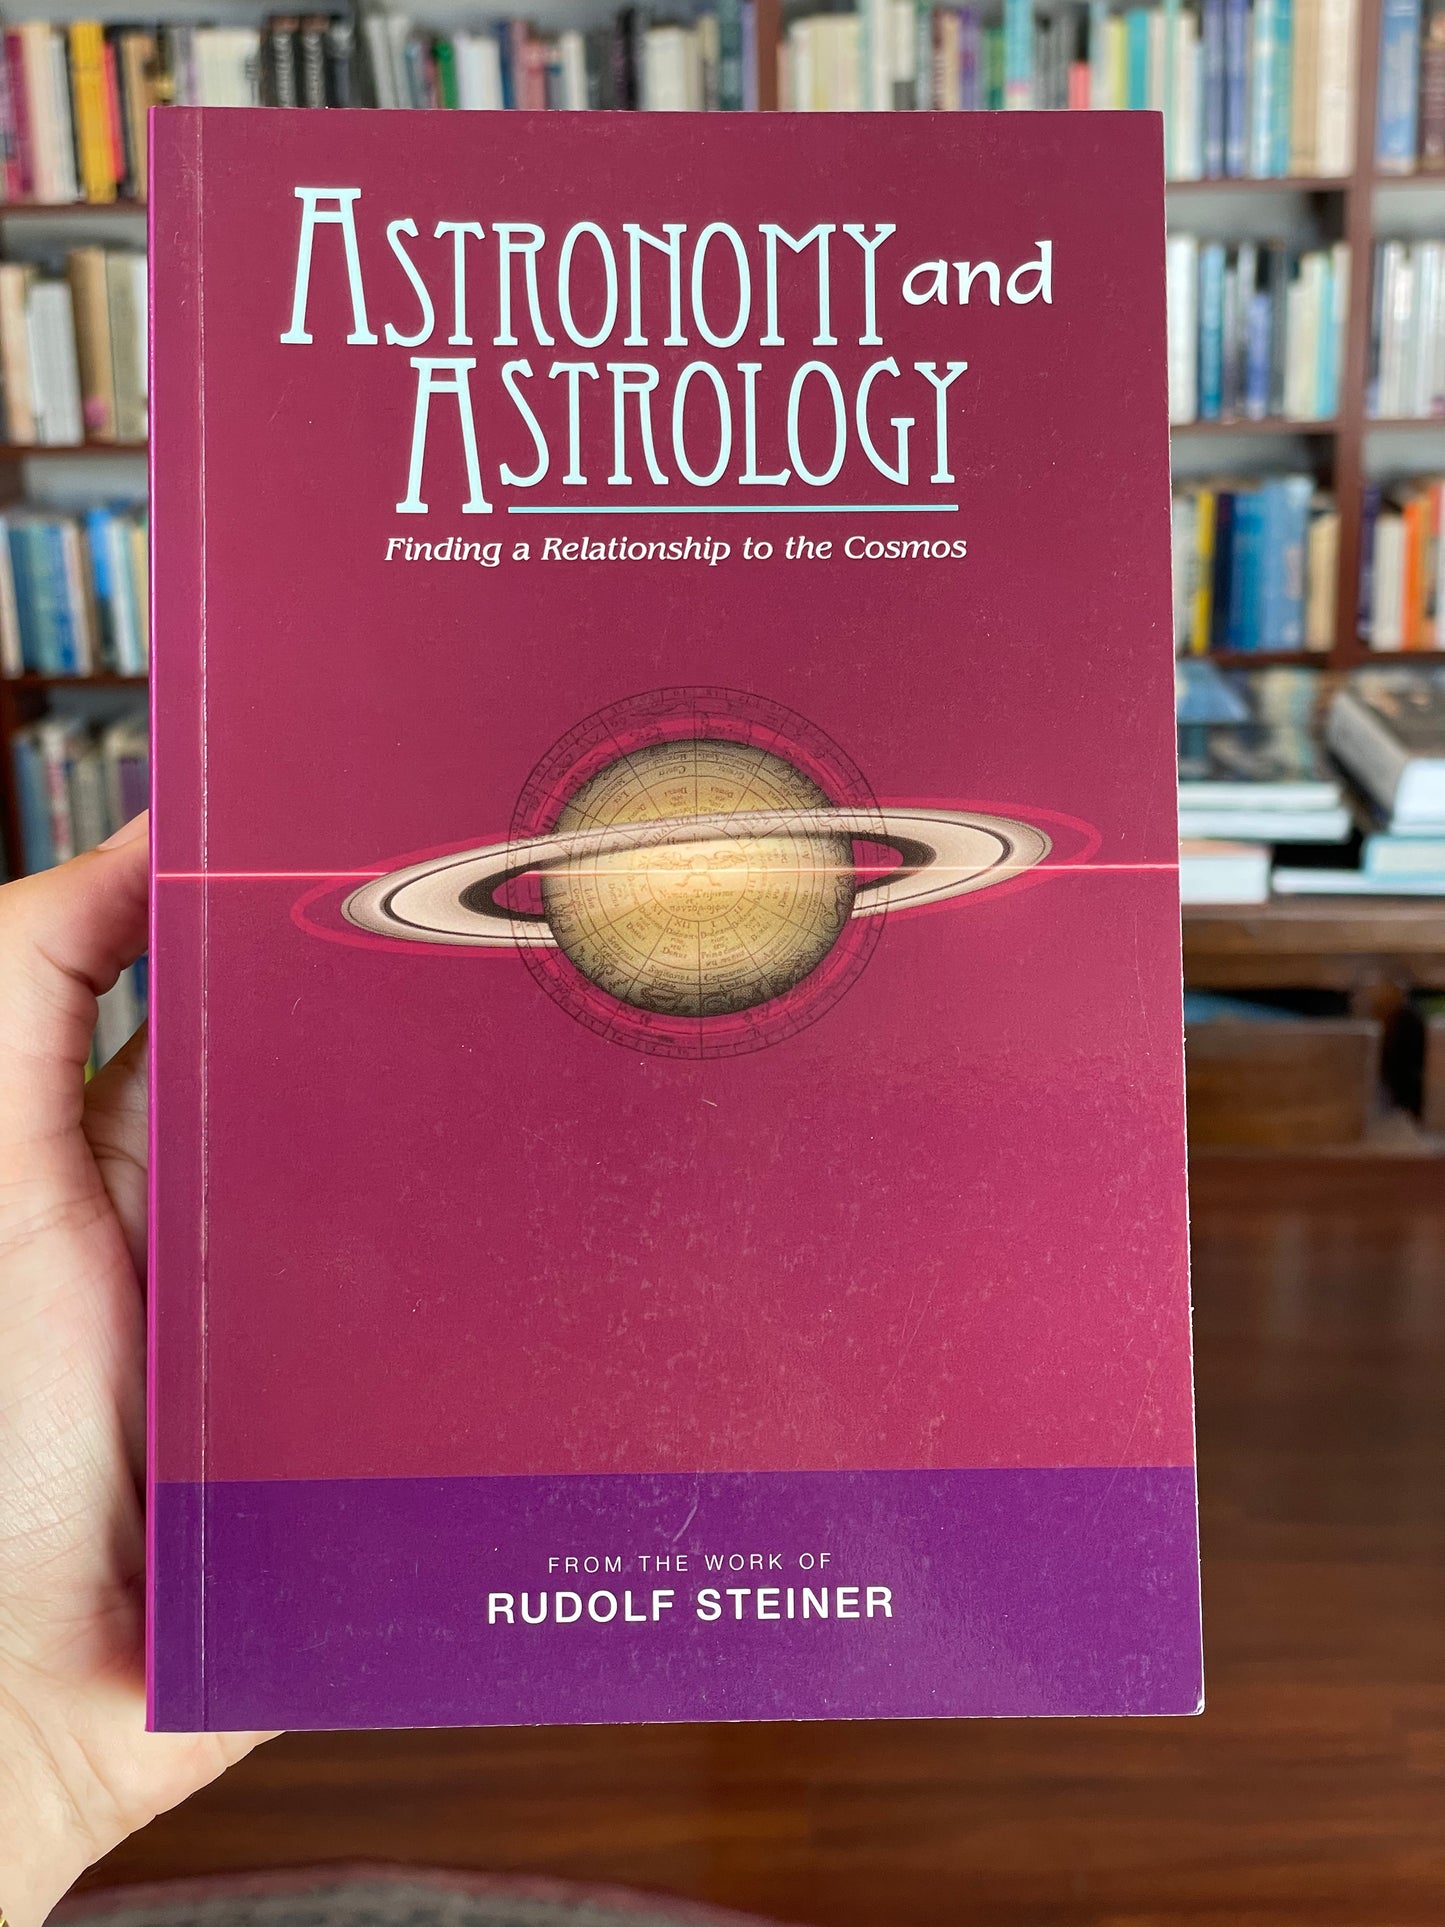 Astronomy and Astrology by Rudolf Steiner